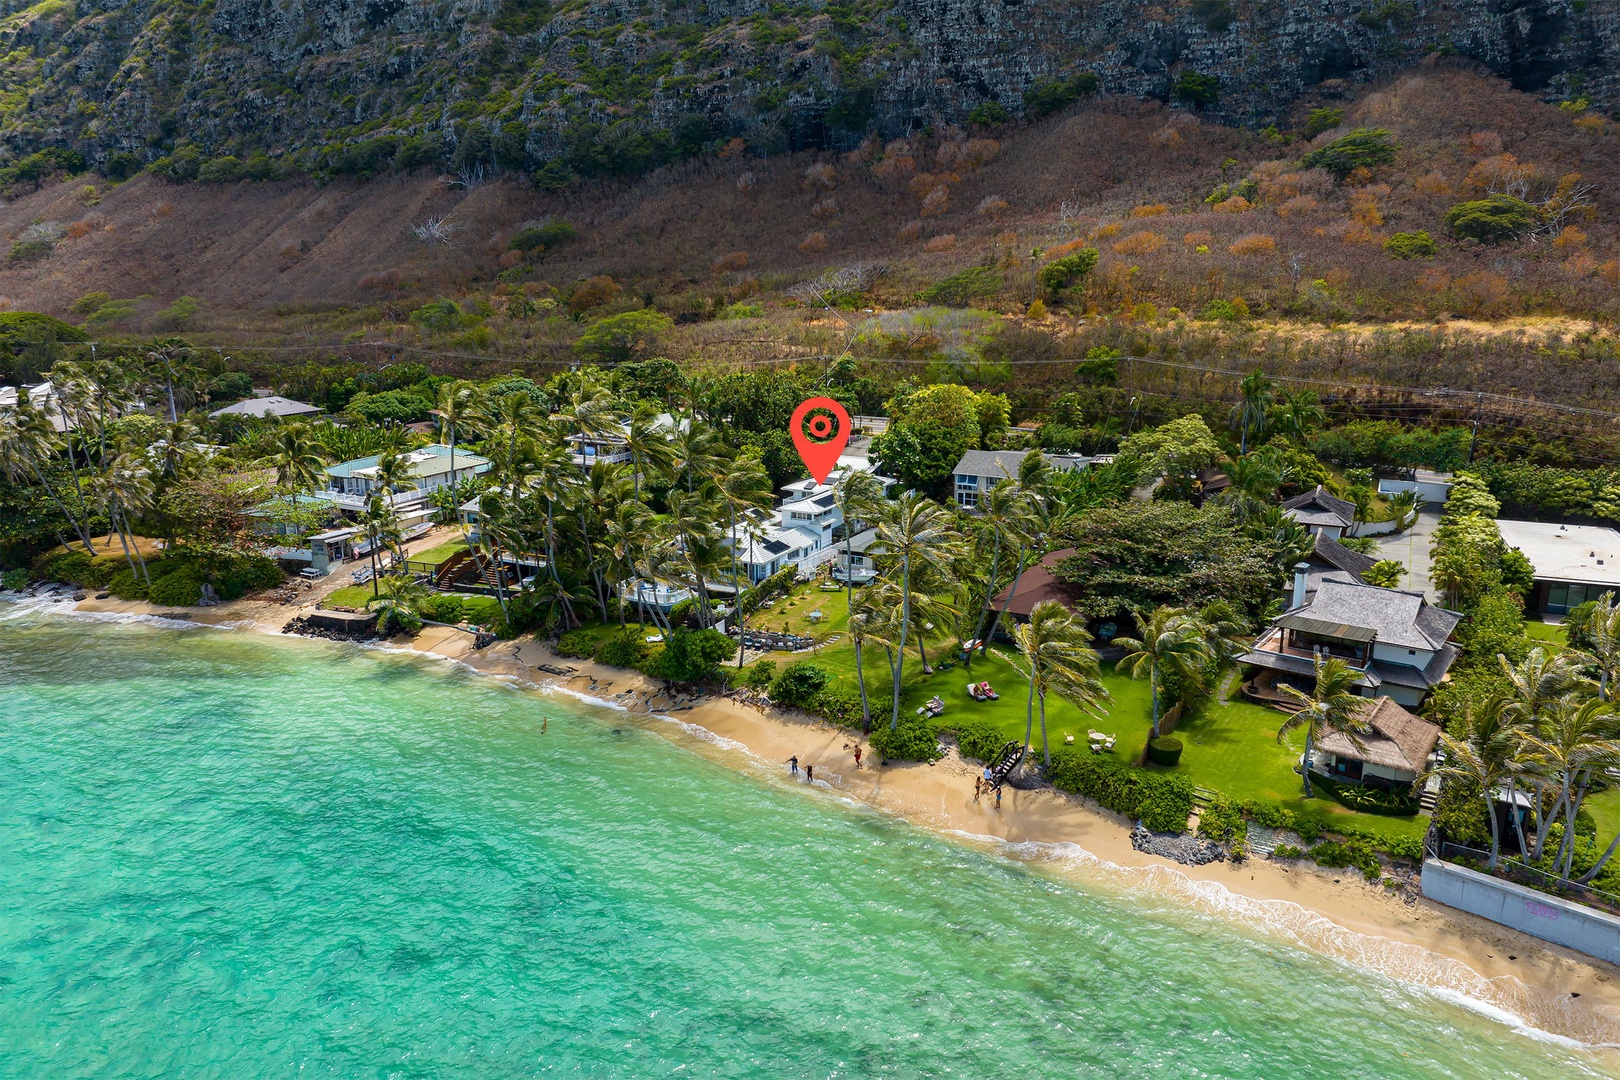 Waimanalo Vacation Rentals, Mana Kai at Waimanalo - Location of your home away from home, just a few steps from the beachline